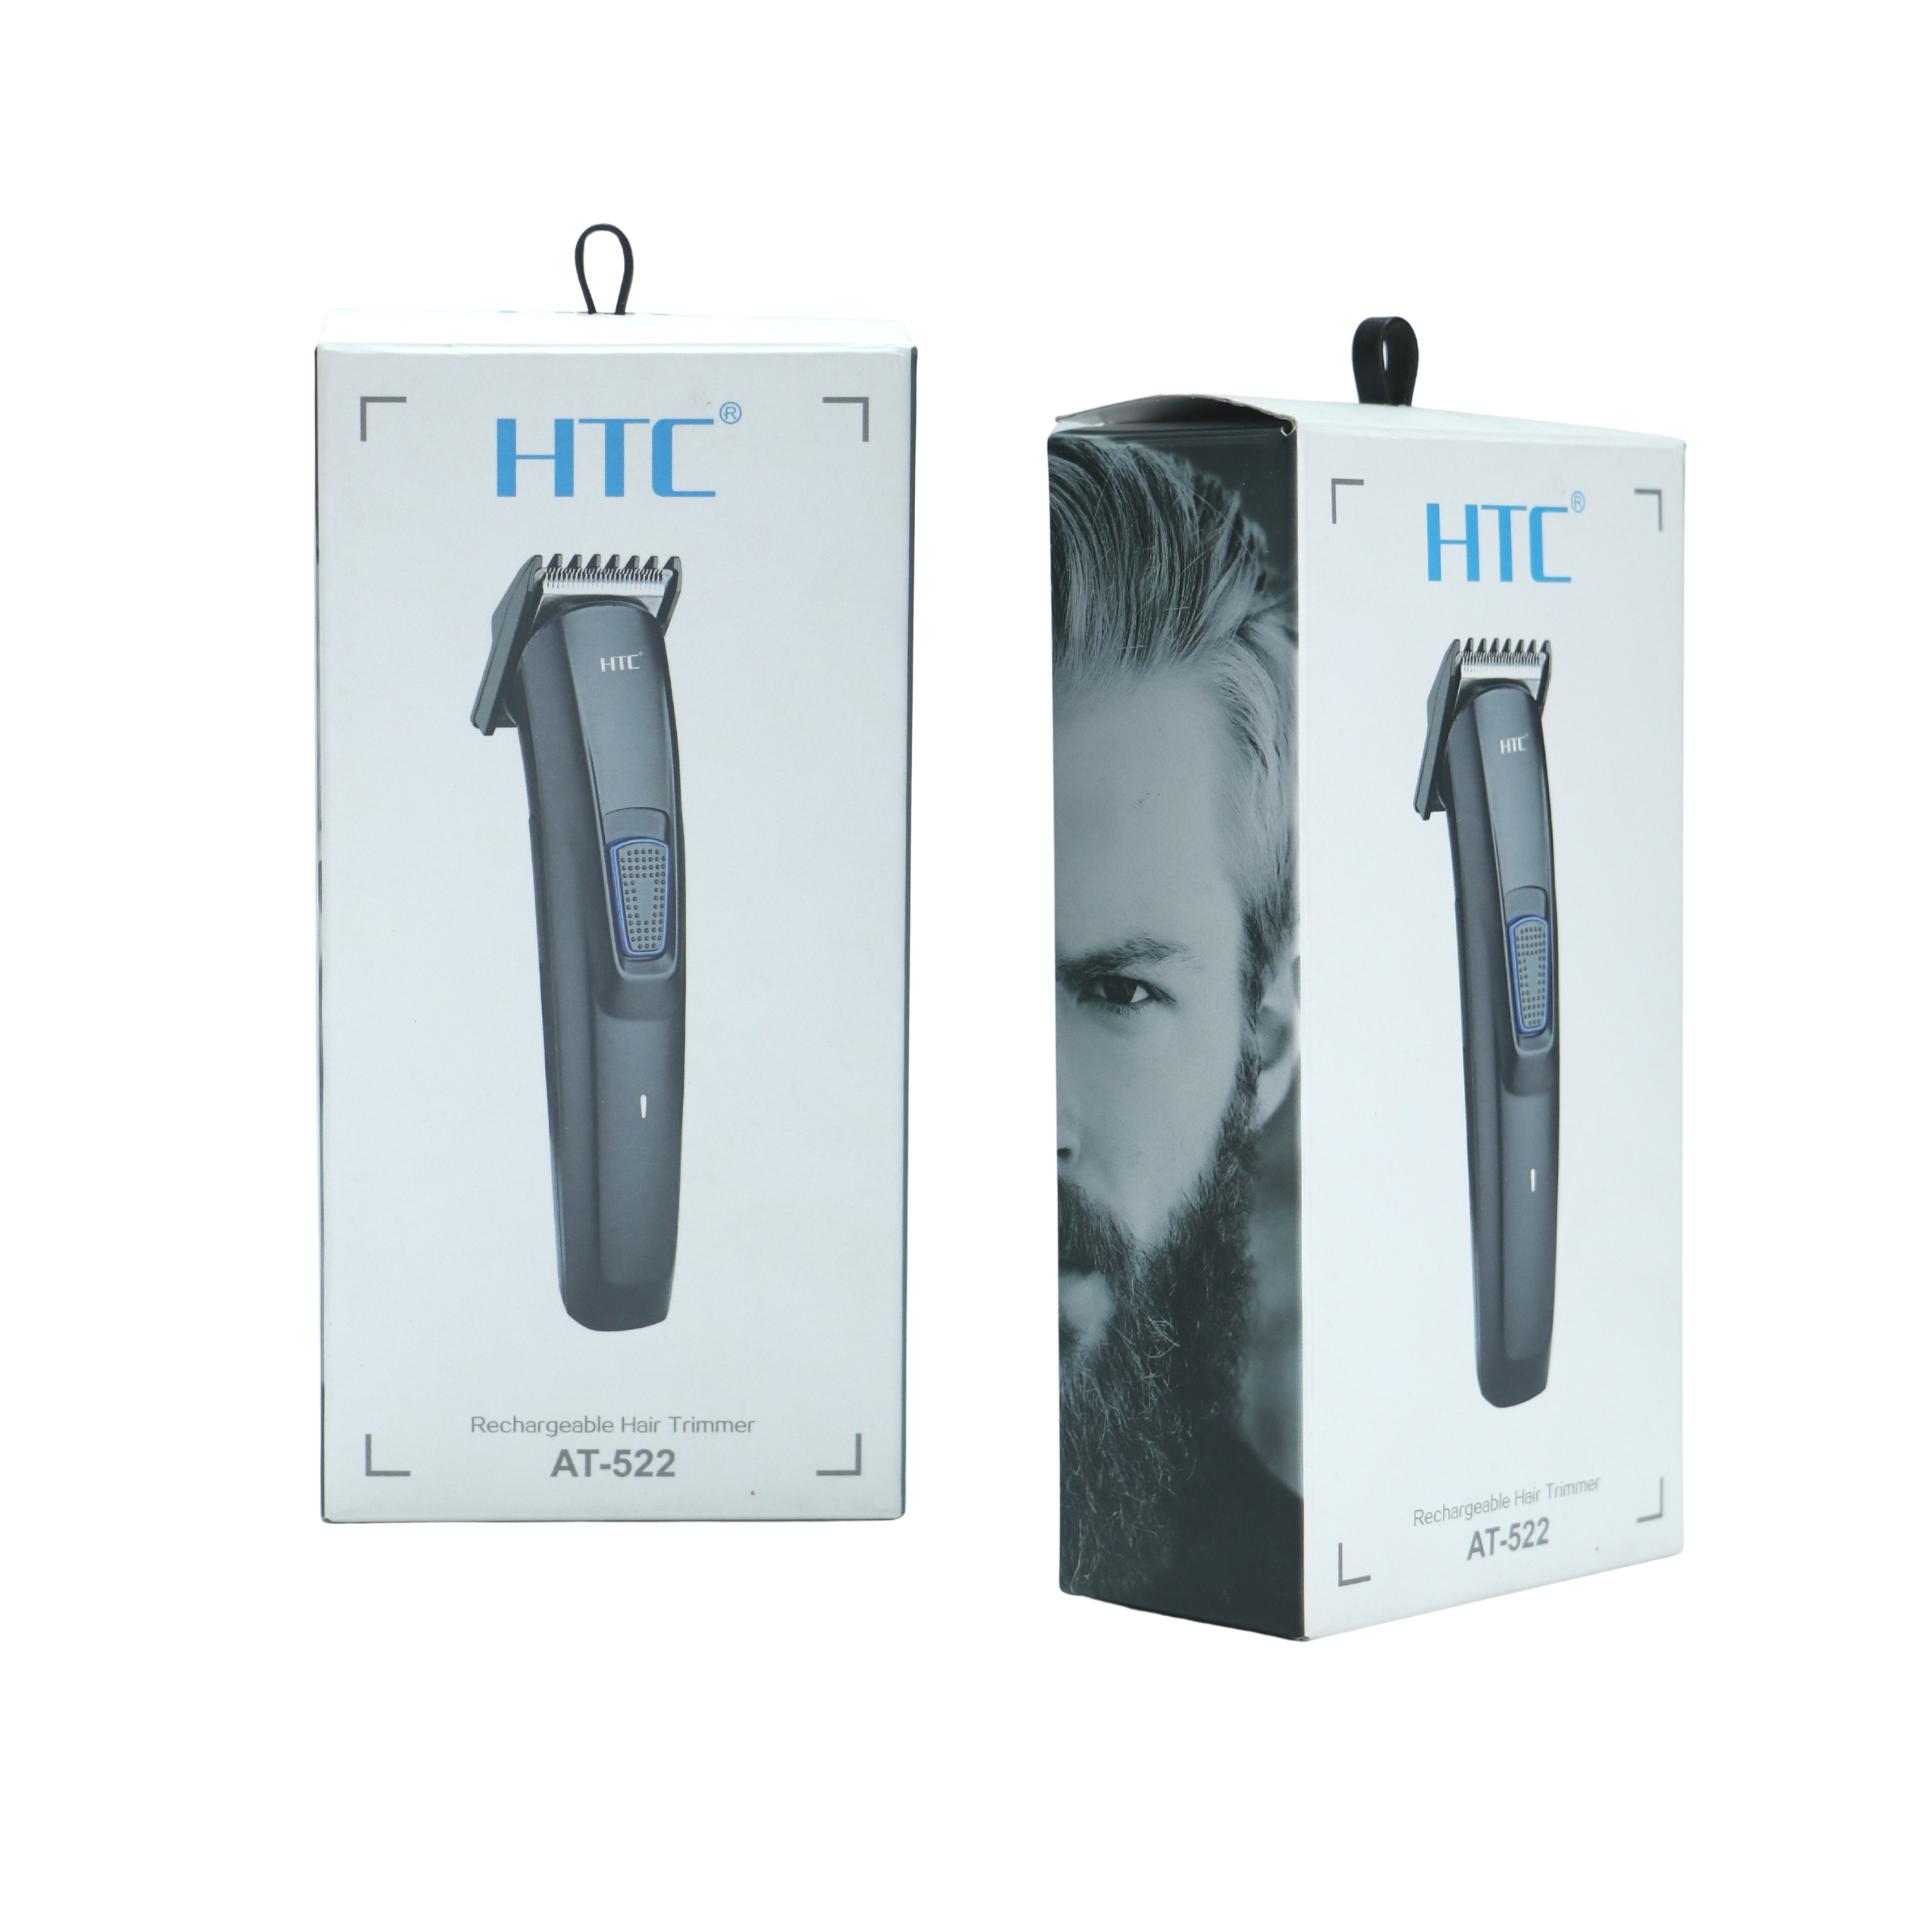 HTC AT-522 Electric Shaver Trimmer